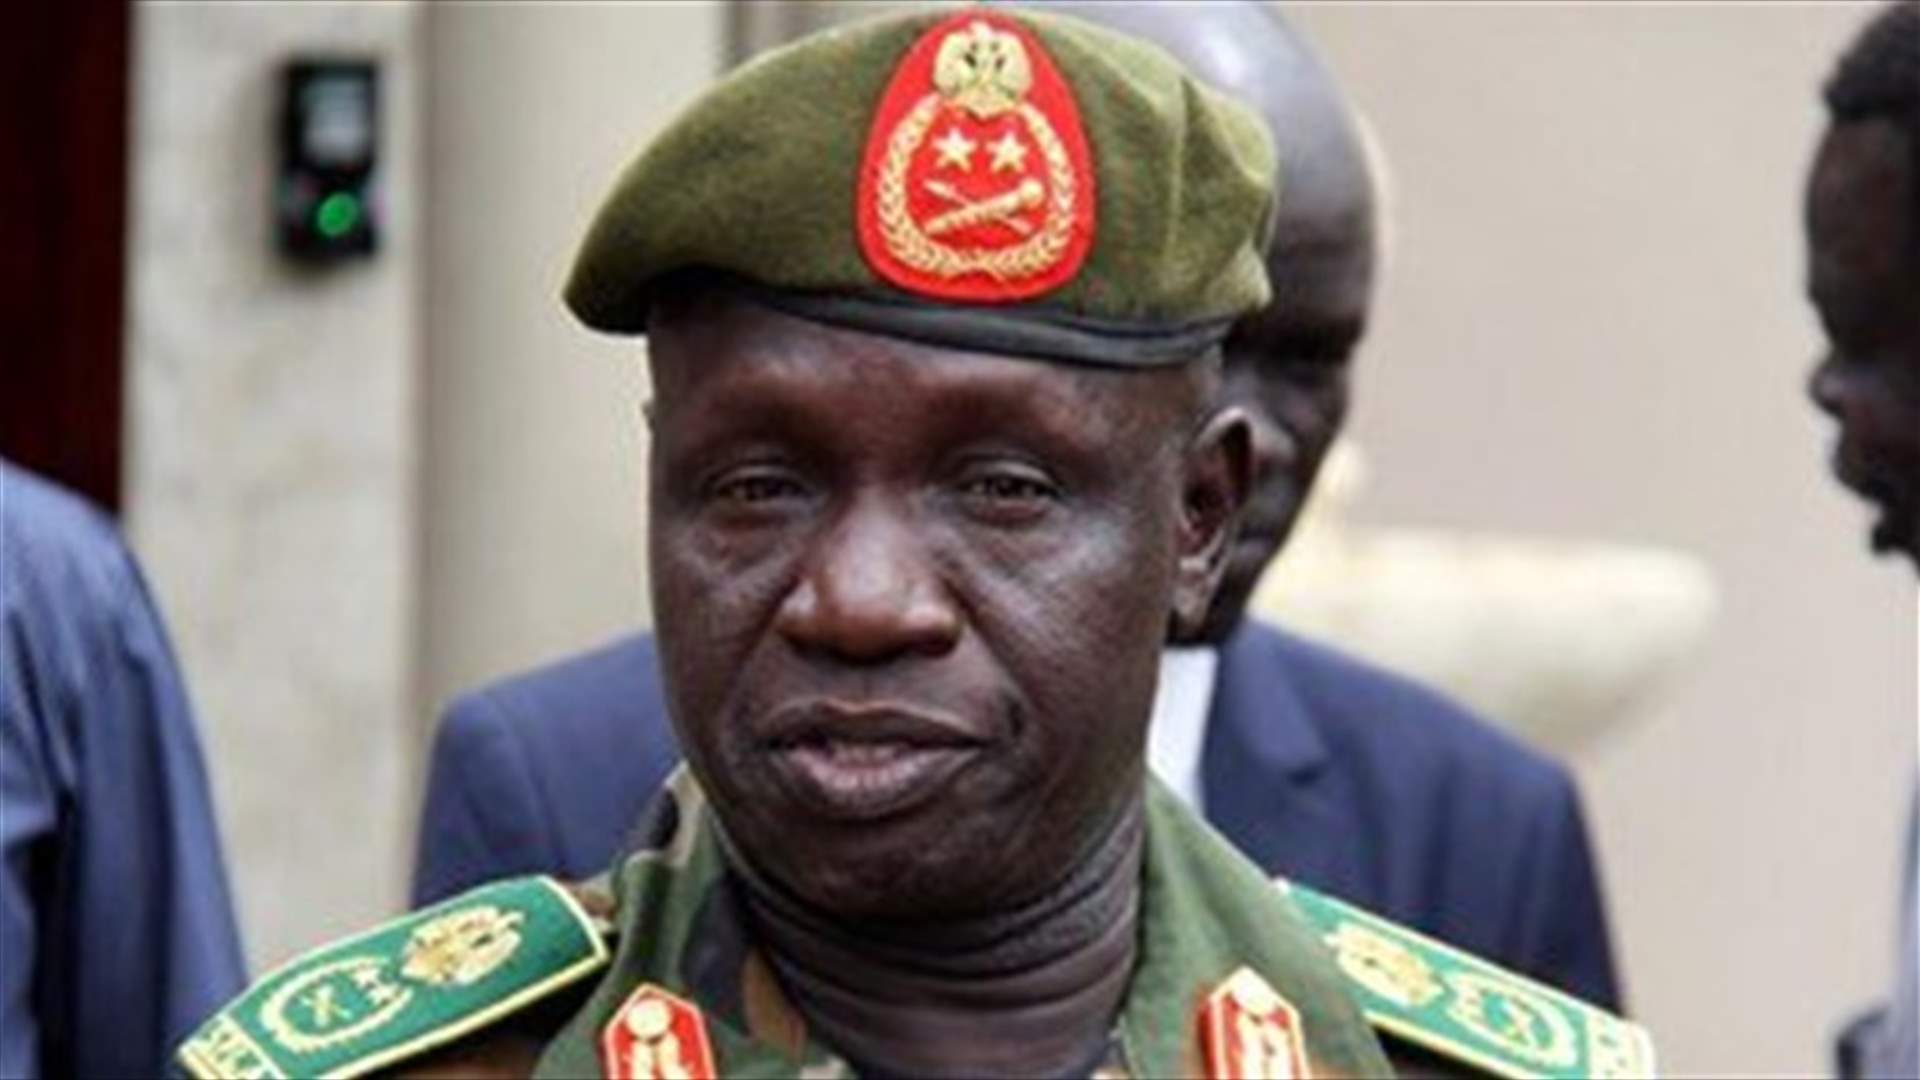 South Sudan says head of army has died